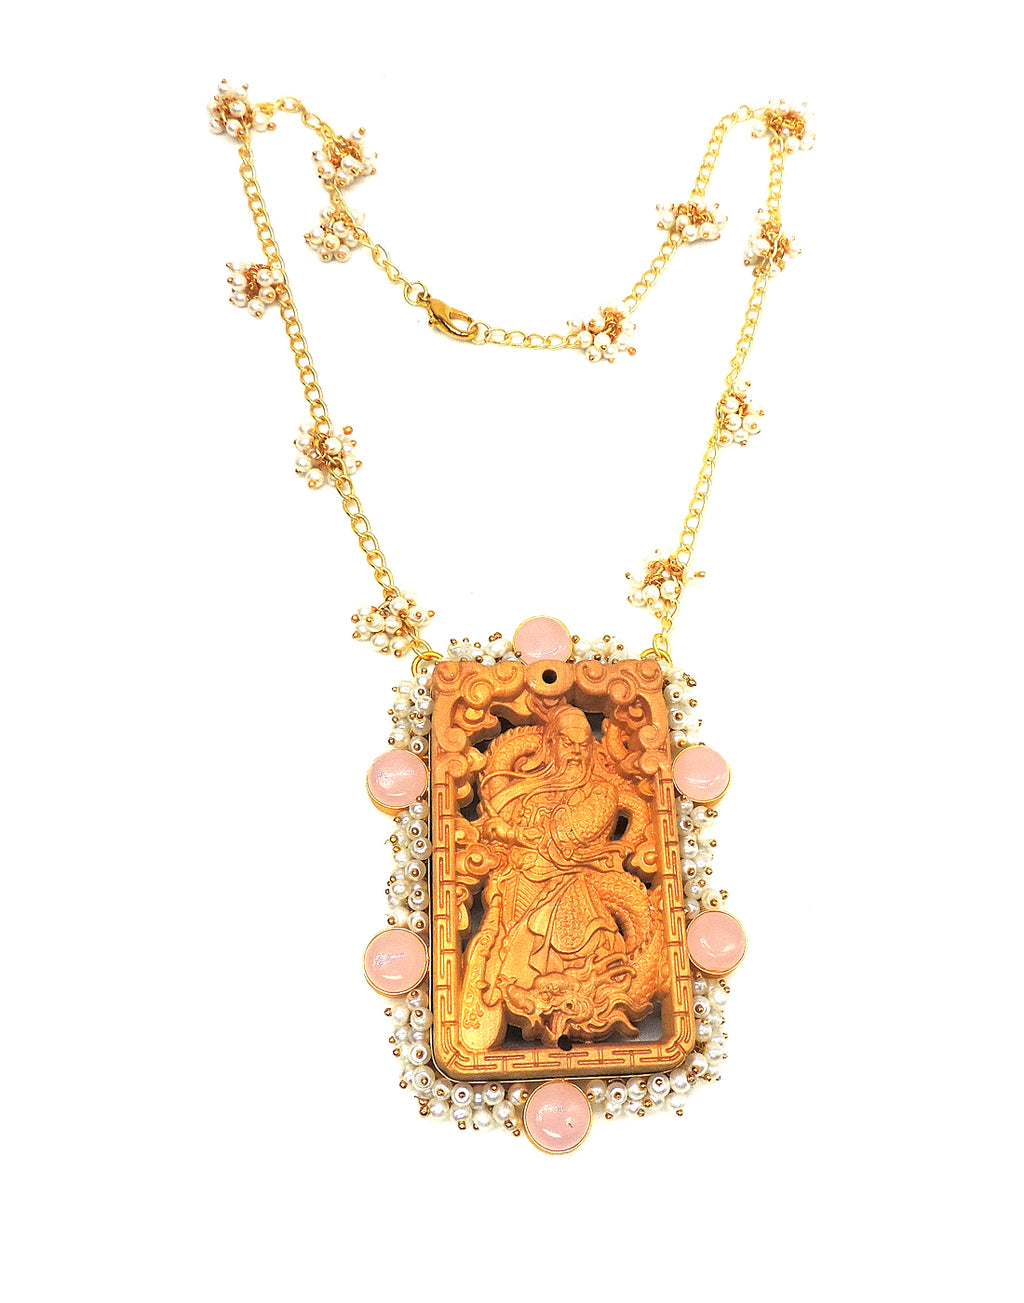 Heritage Pendant Necklace - Statement Necklaces - Gold-Plated & Hypoallergenic Jewellery - Made in India - Dubai Jewellery - Dori